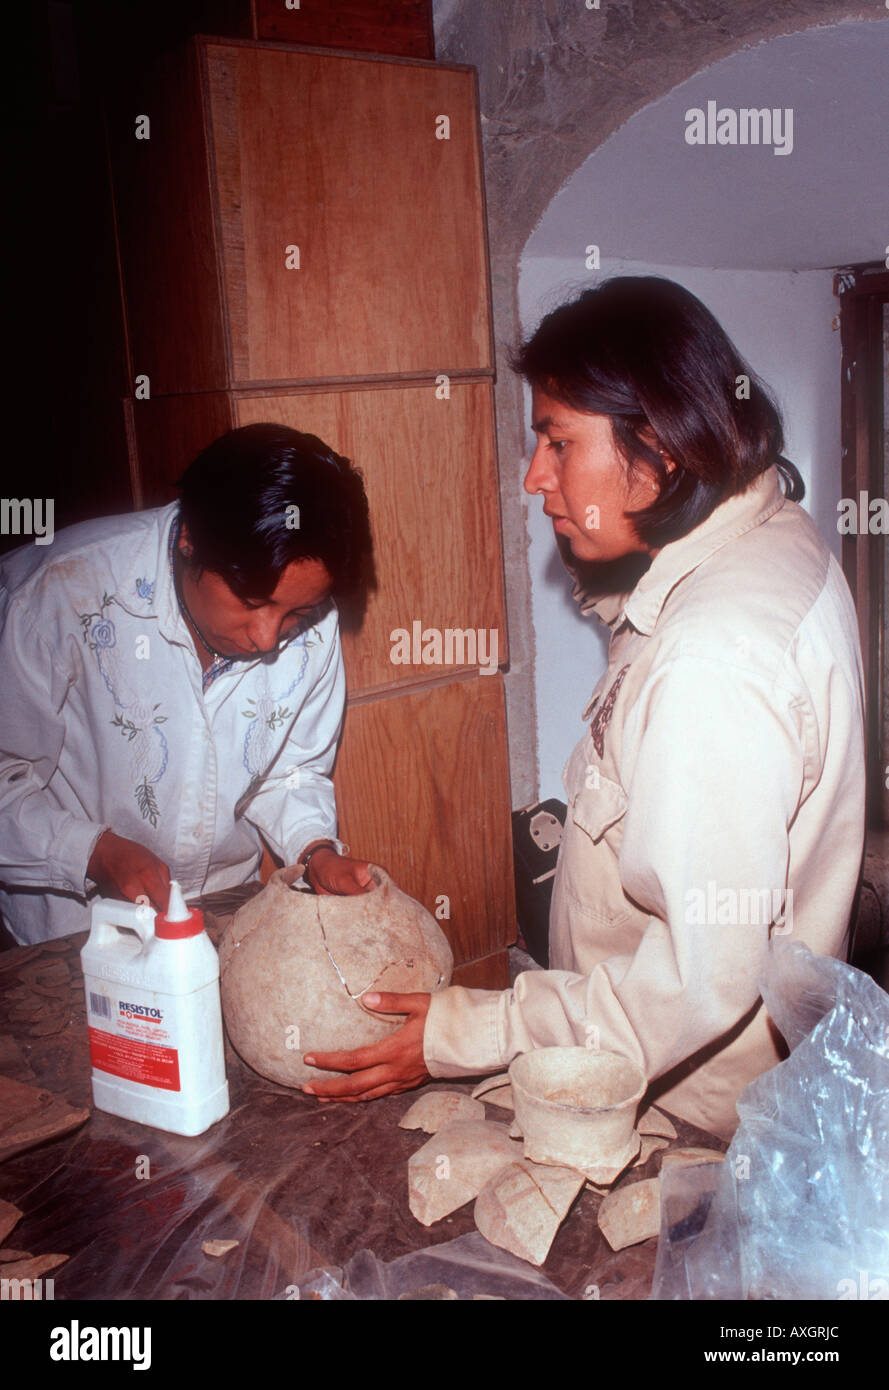 Women archaeologists In a Oaxaca Mexico lab reconstruct ceramic vessels found in a tomb burial. Stock Photo